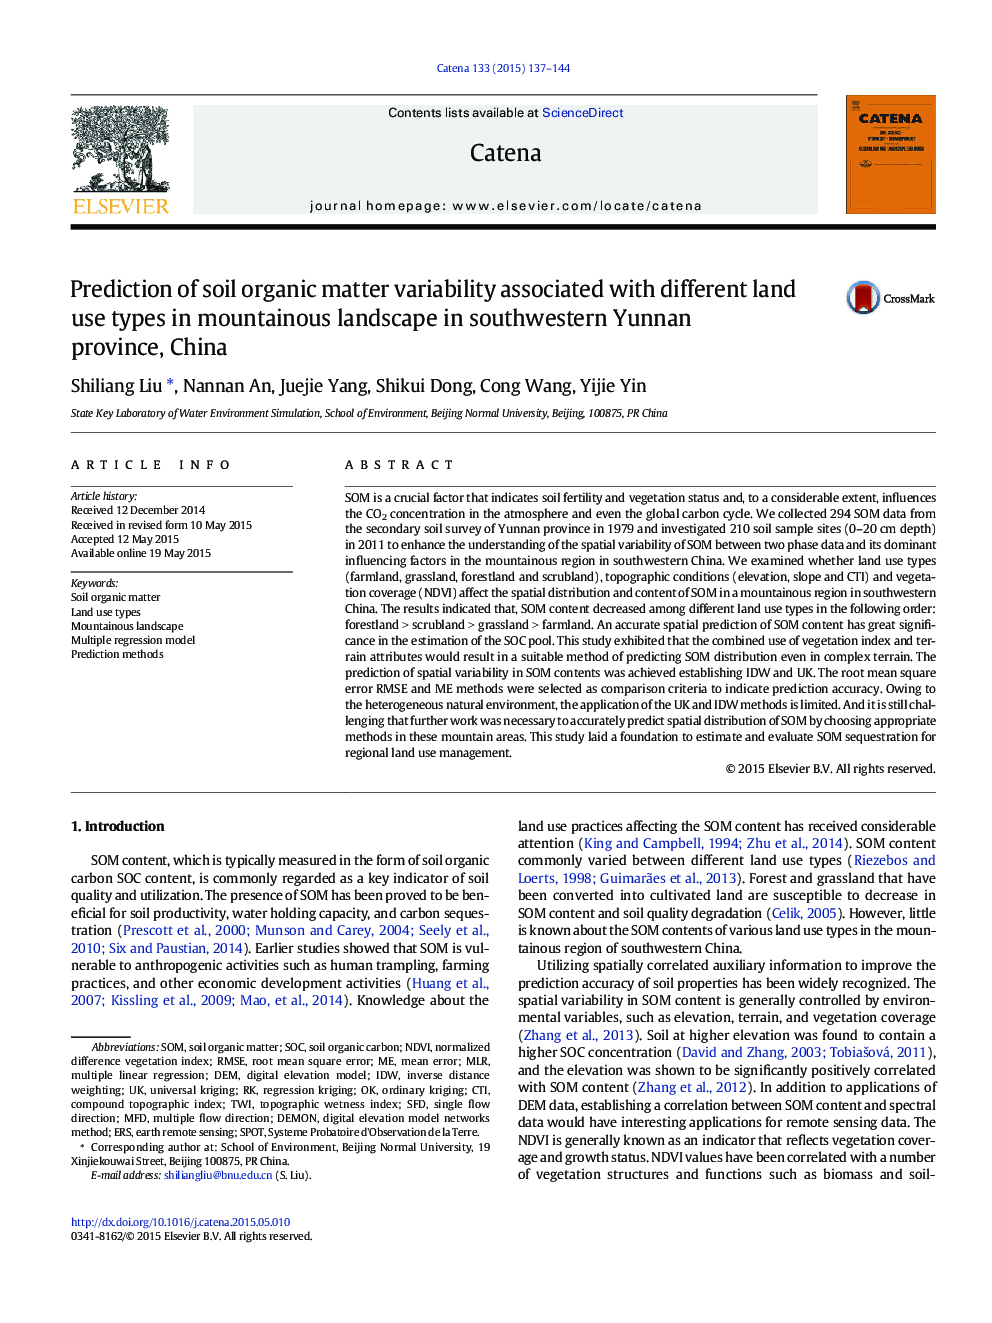 Prediction of soil organic matter variability associated with different land use types in mountainous landscape in southwestern Yunnan province, China